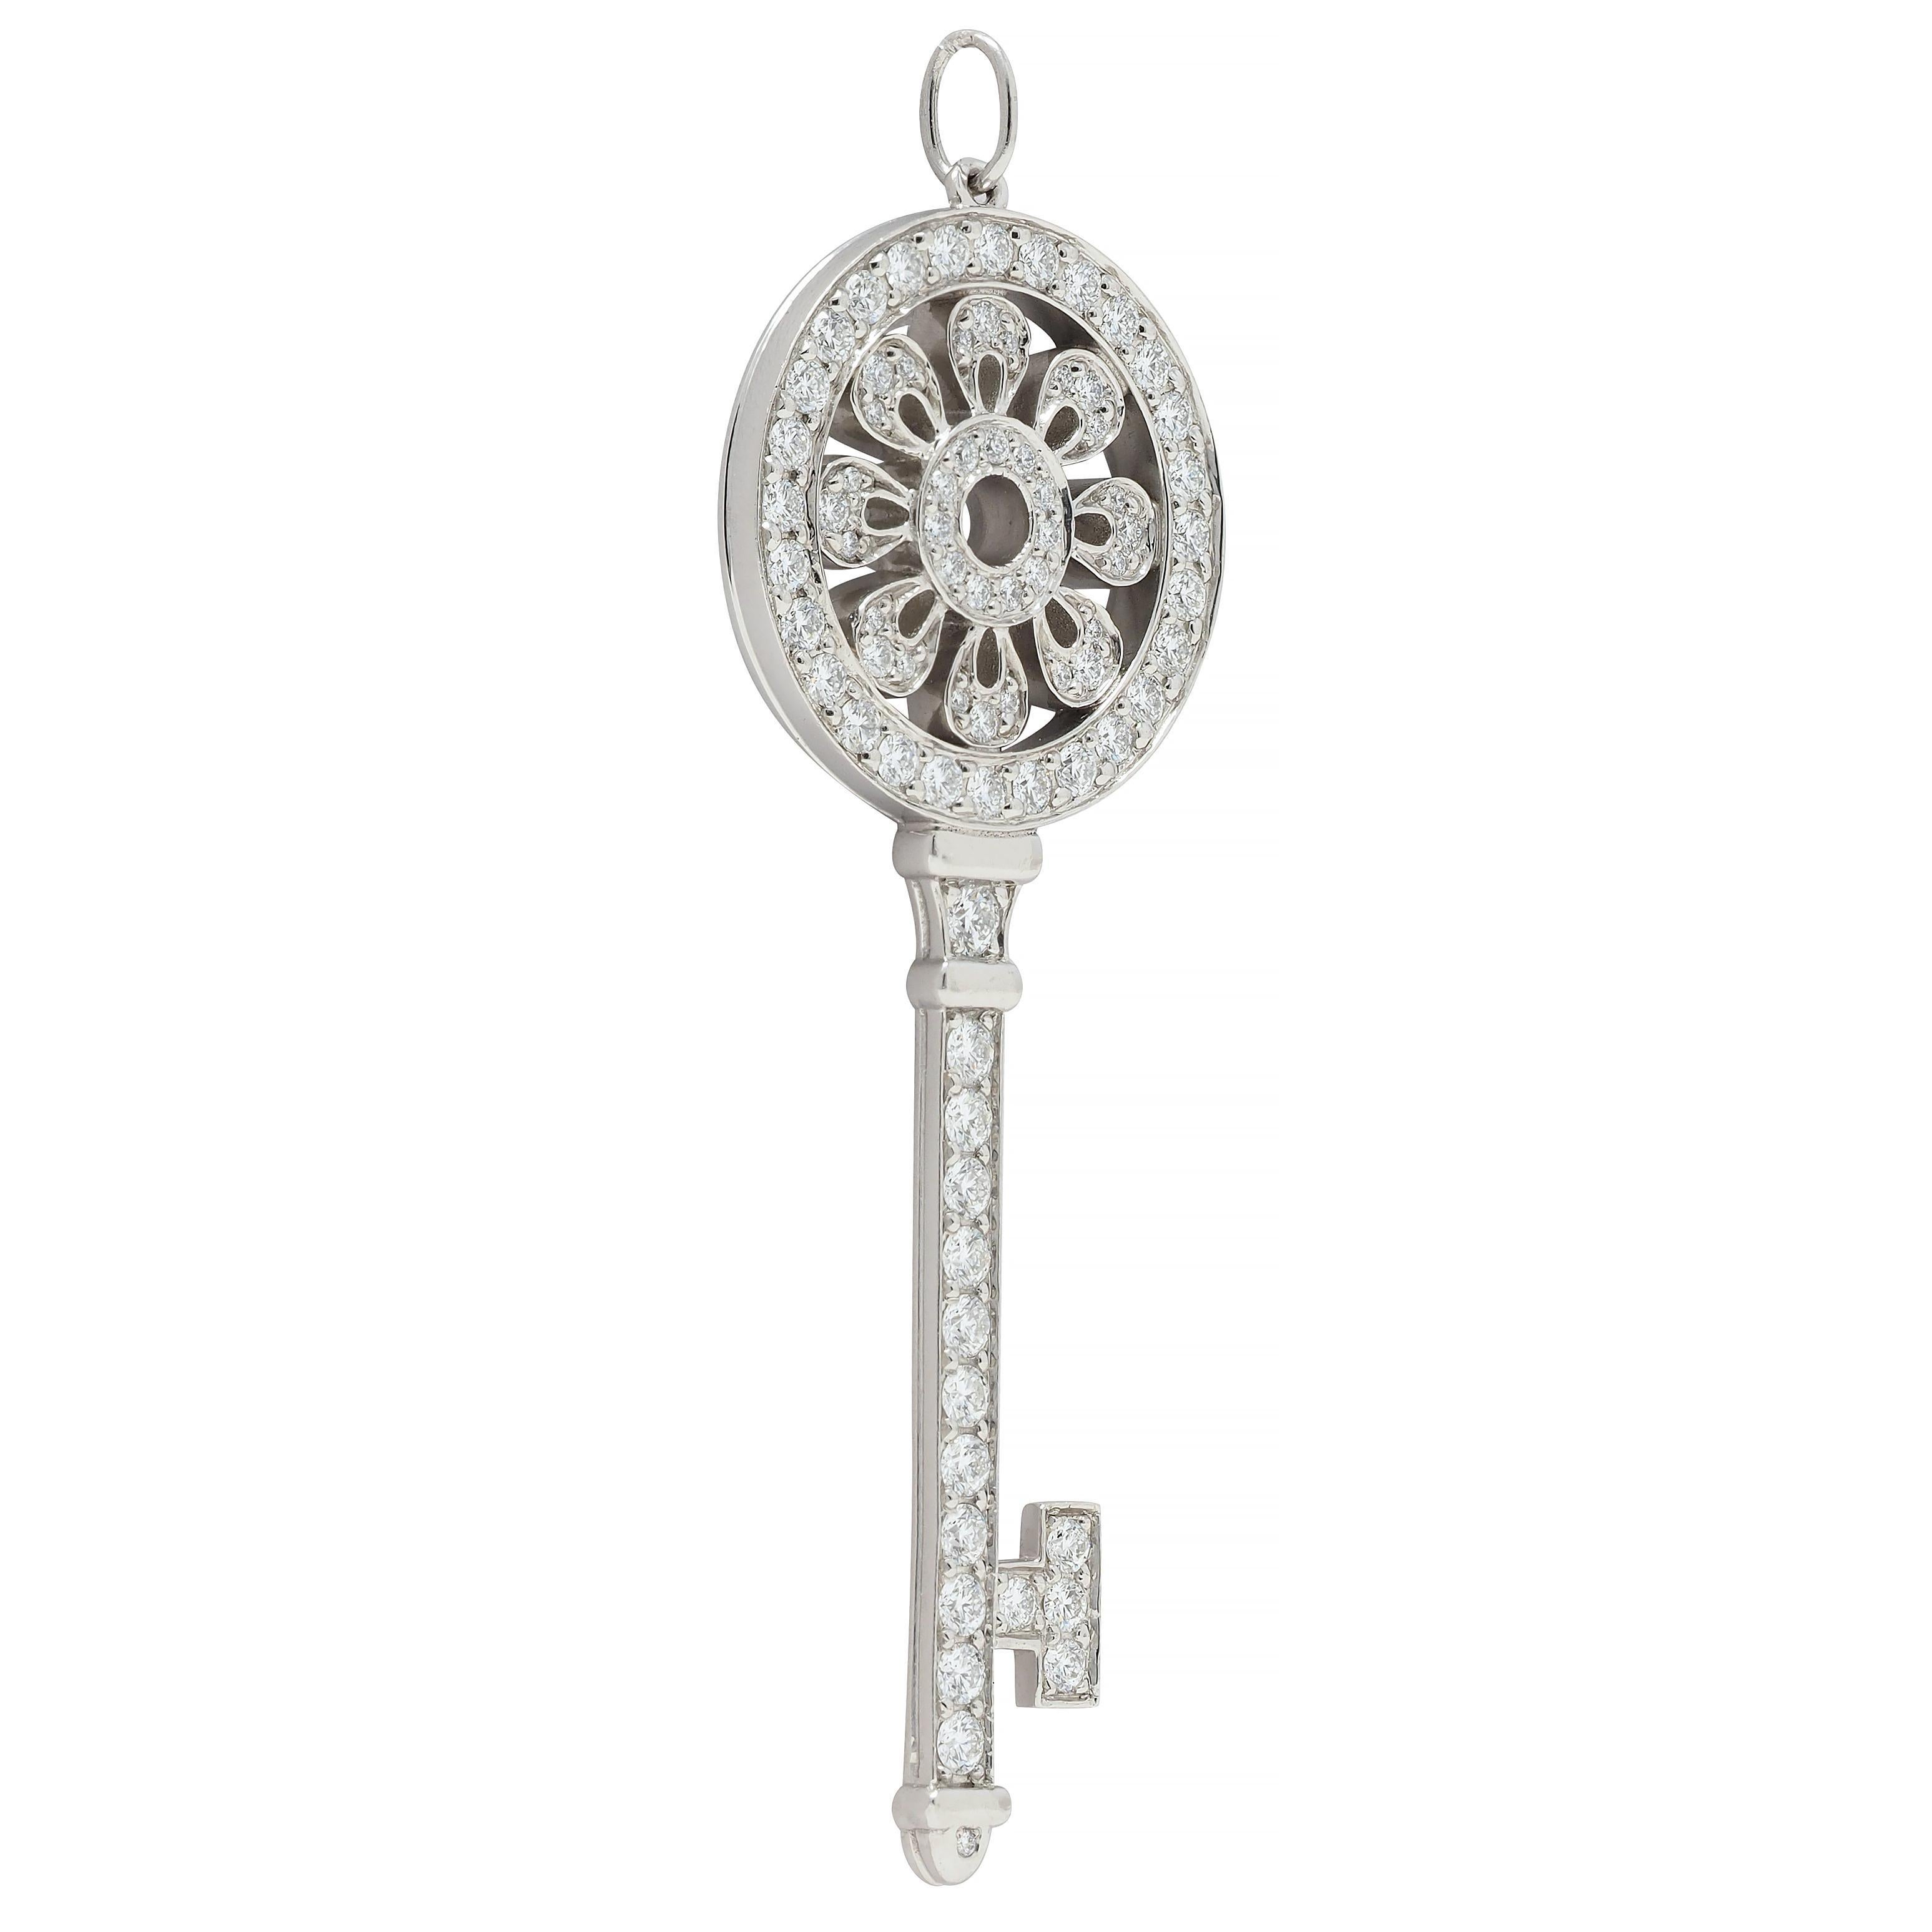 Designed as a stylized key with a pierced floral motif head 
Bead set throughout with round brilliant cut diamonds 
Weighing approximately 1.76 carats total 
G color with VS1 clarity 
Completed by jump ring bale 
Stamped for platinum
With maker's